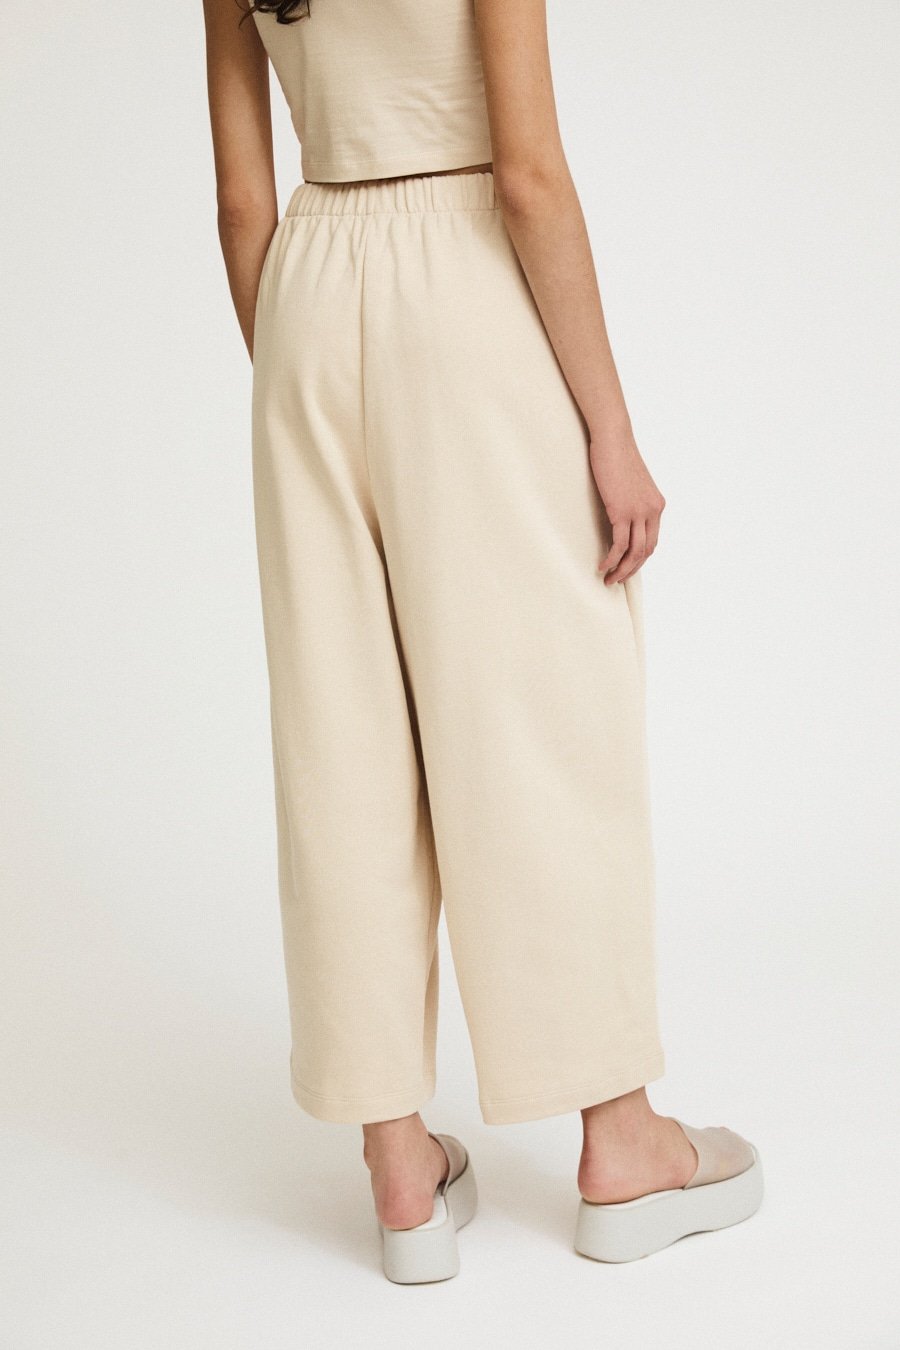 rita row wanda maxi pant / Curved cotton knit pants for all-day wear. High rise with elastic waistband with adjustable drawstring and curved leg. 100% organic cotton. Ethically made in Portugal.